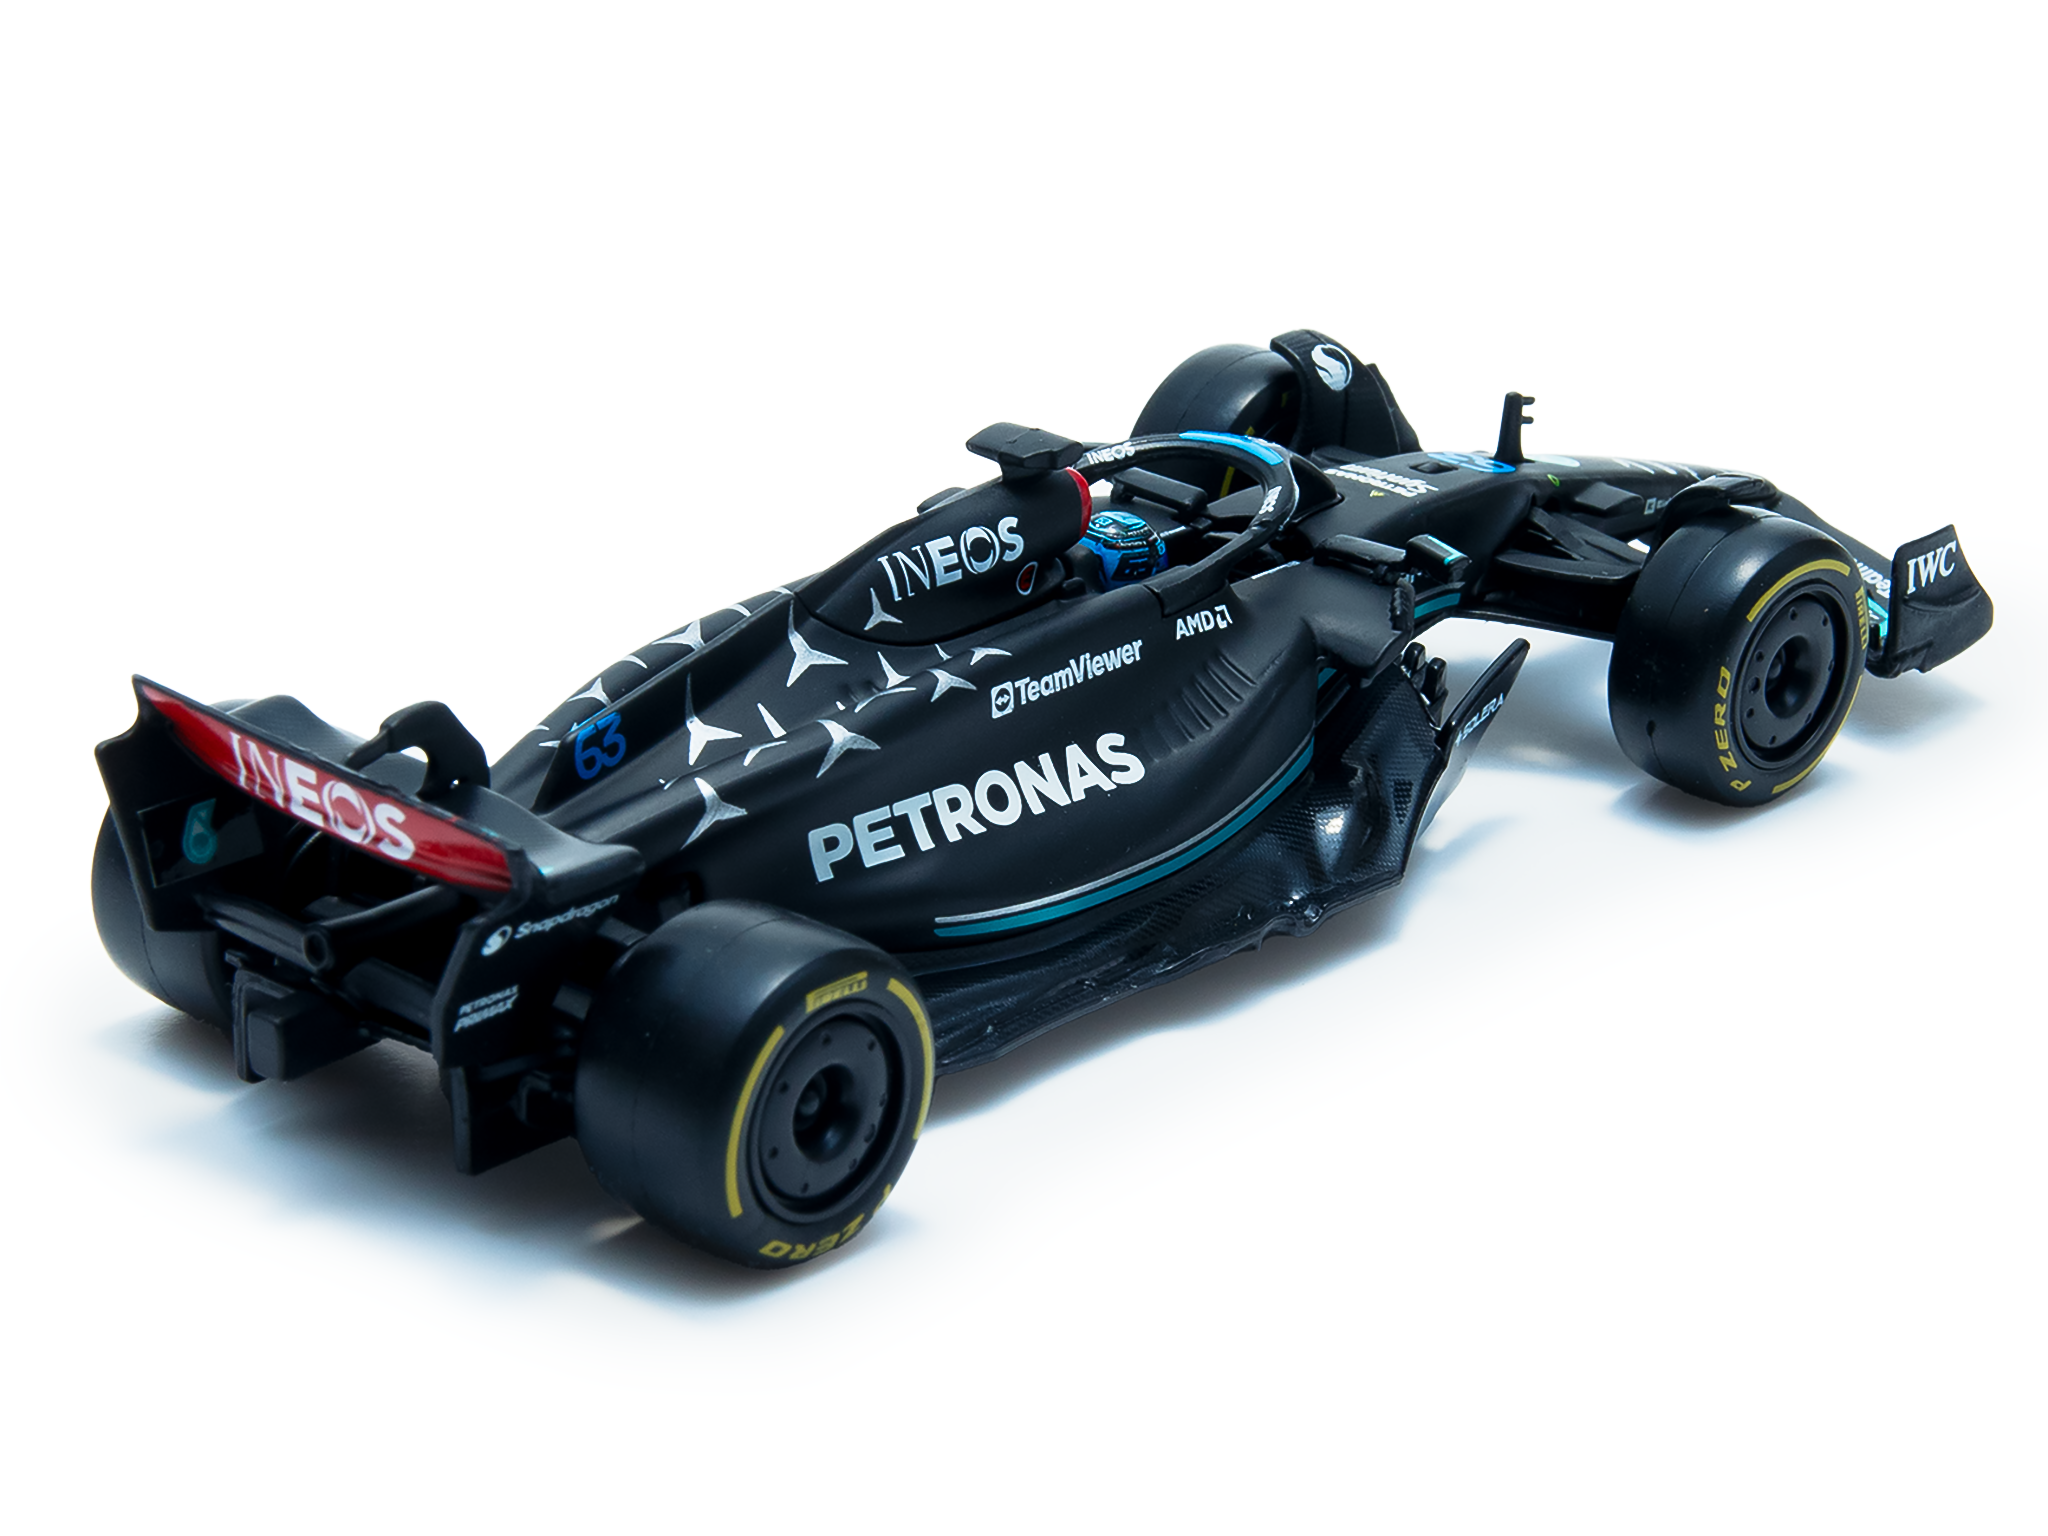 Mercedes-AMG F1 W14 E Performance #63 F1 2023 George Russell - 1:43 Scale (w/Driver)